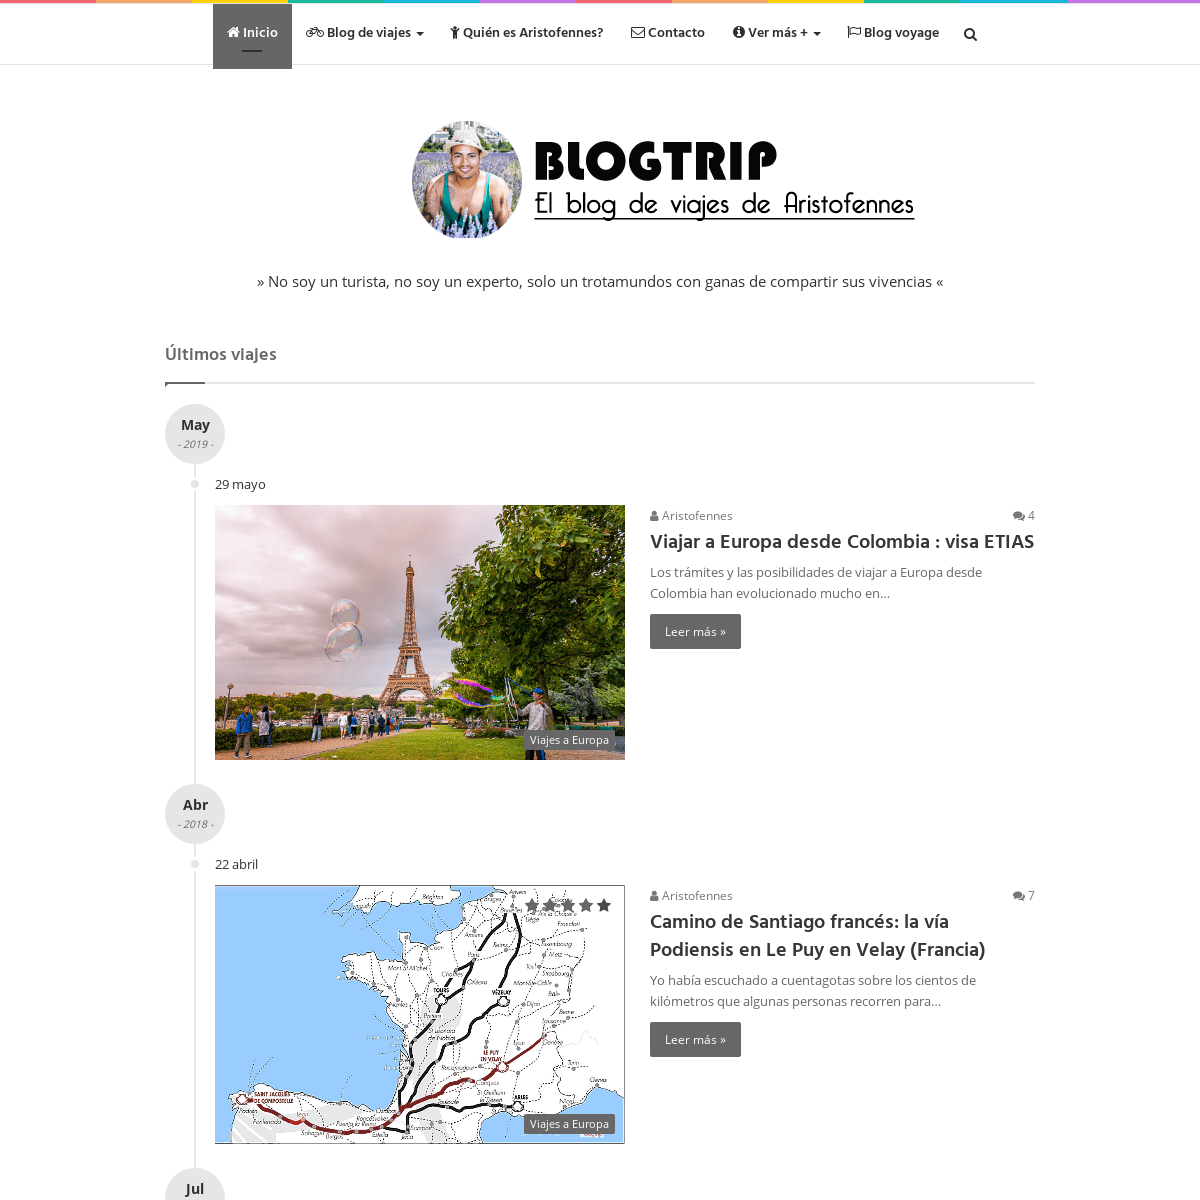 A complete backup of blogtrip.org